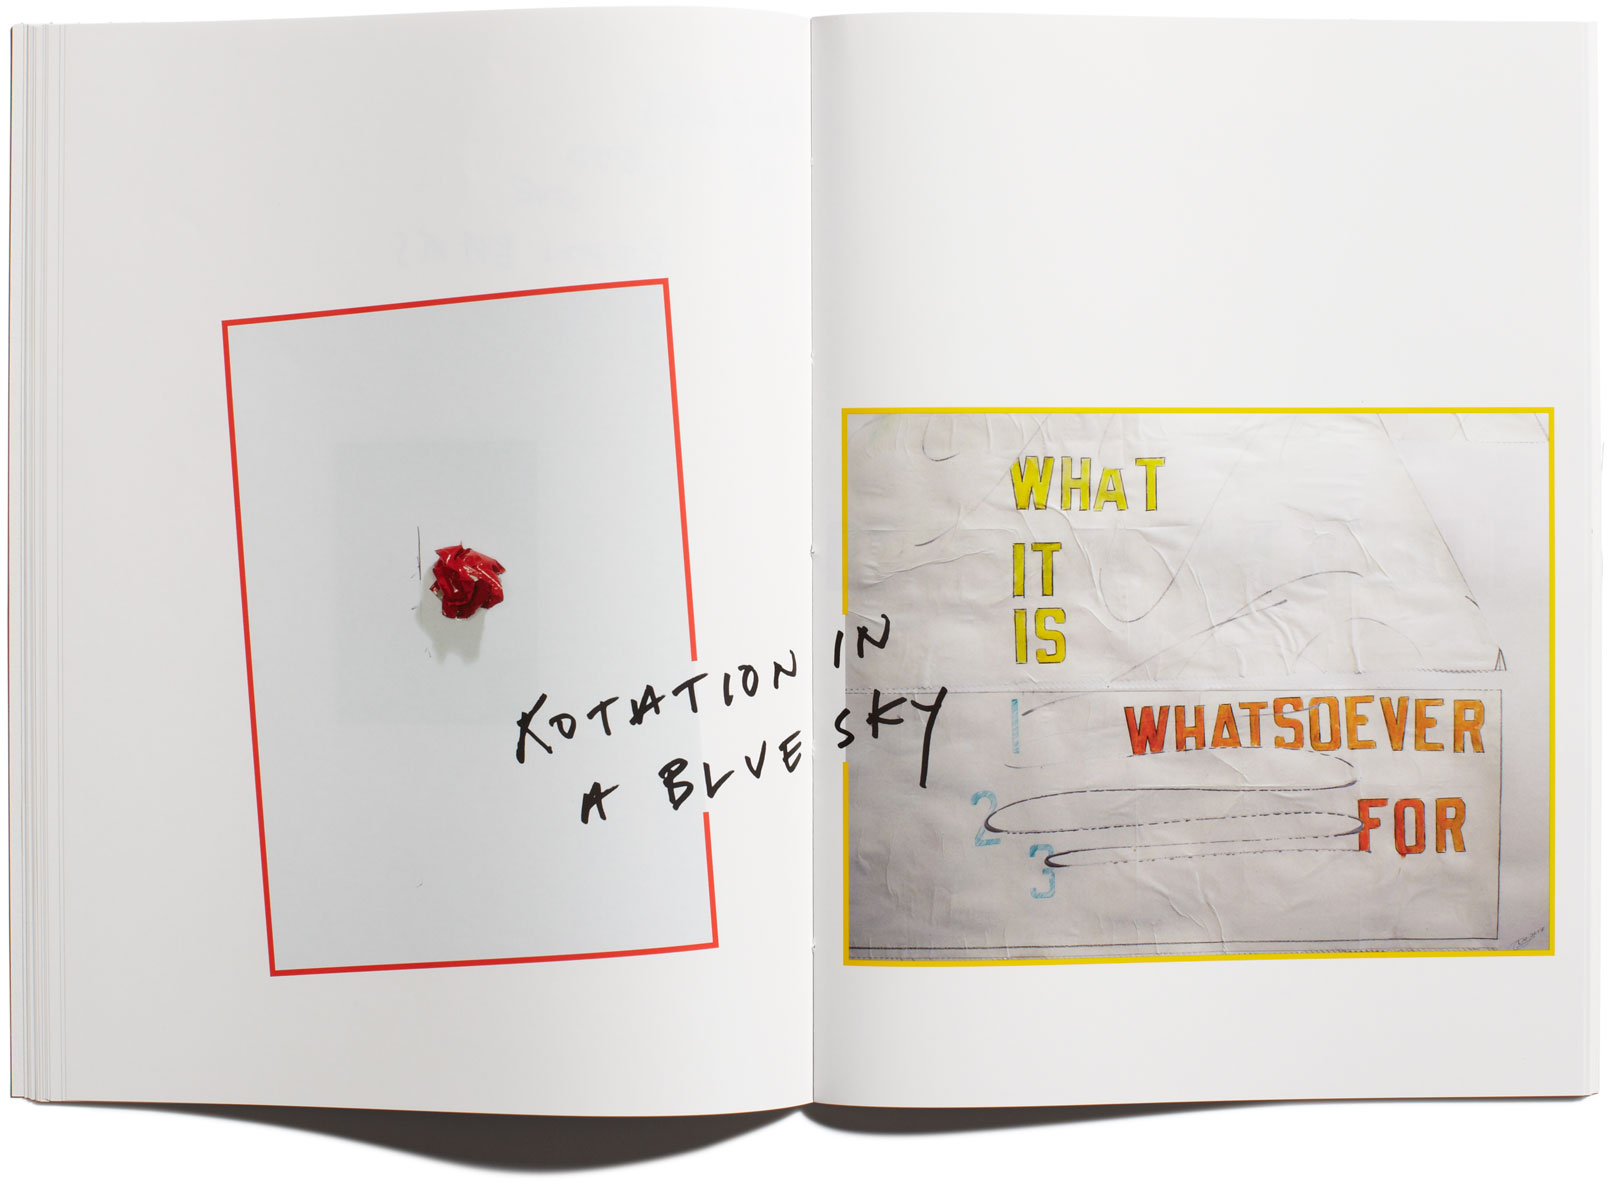 Browns Editions, Browns Editions Publishing, Browns Editions Books, Browns Editions Jonathan Ellery Lawrence Weiner, Browns Editions Here It Is Here It Aint, Browns Editions Jonathan Ellery Lawrence Weiner Here It Is Here It Aint